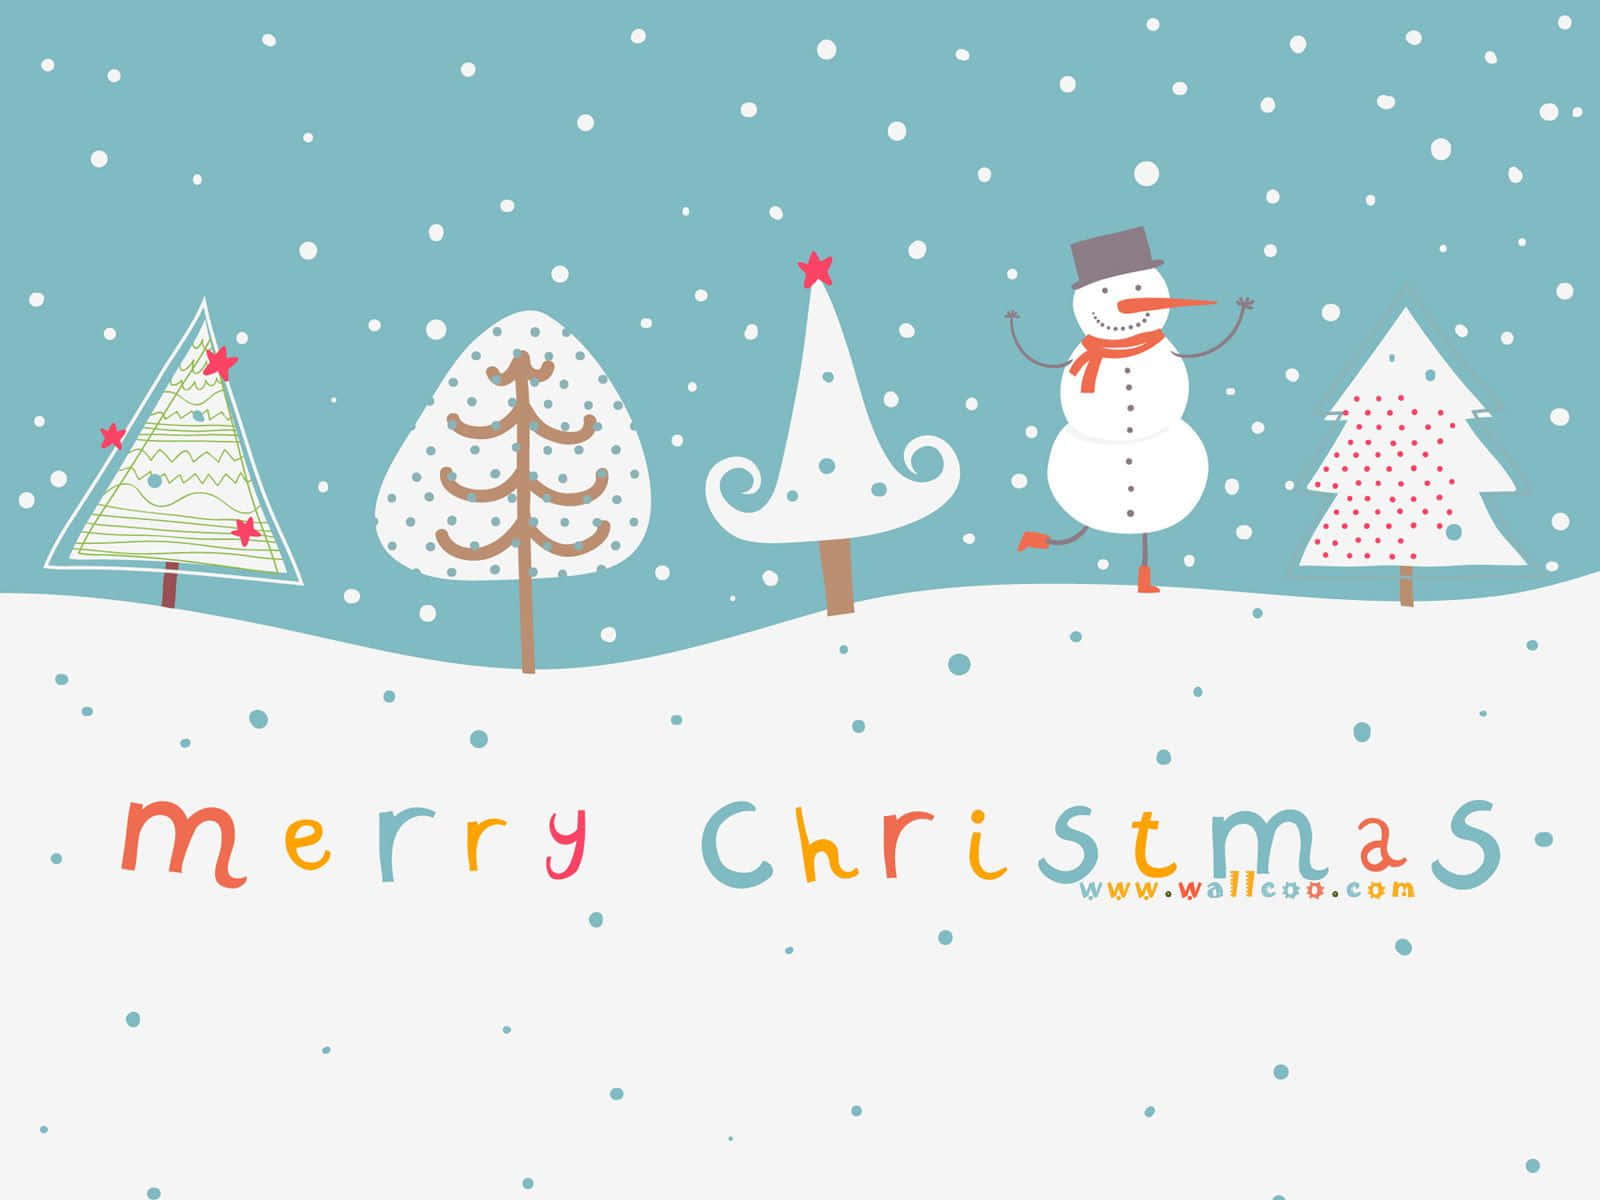 Merry Christmas Card With Snowman And Trees Wallpaper